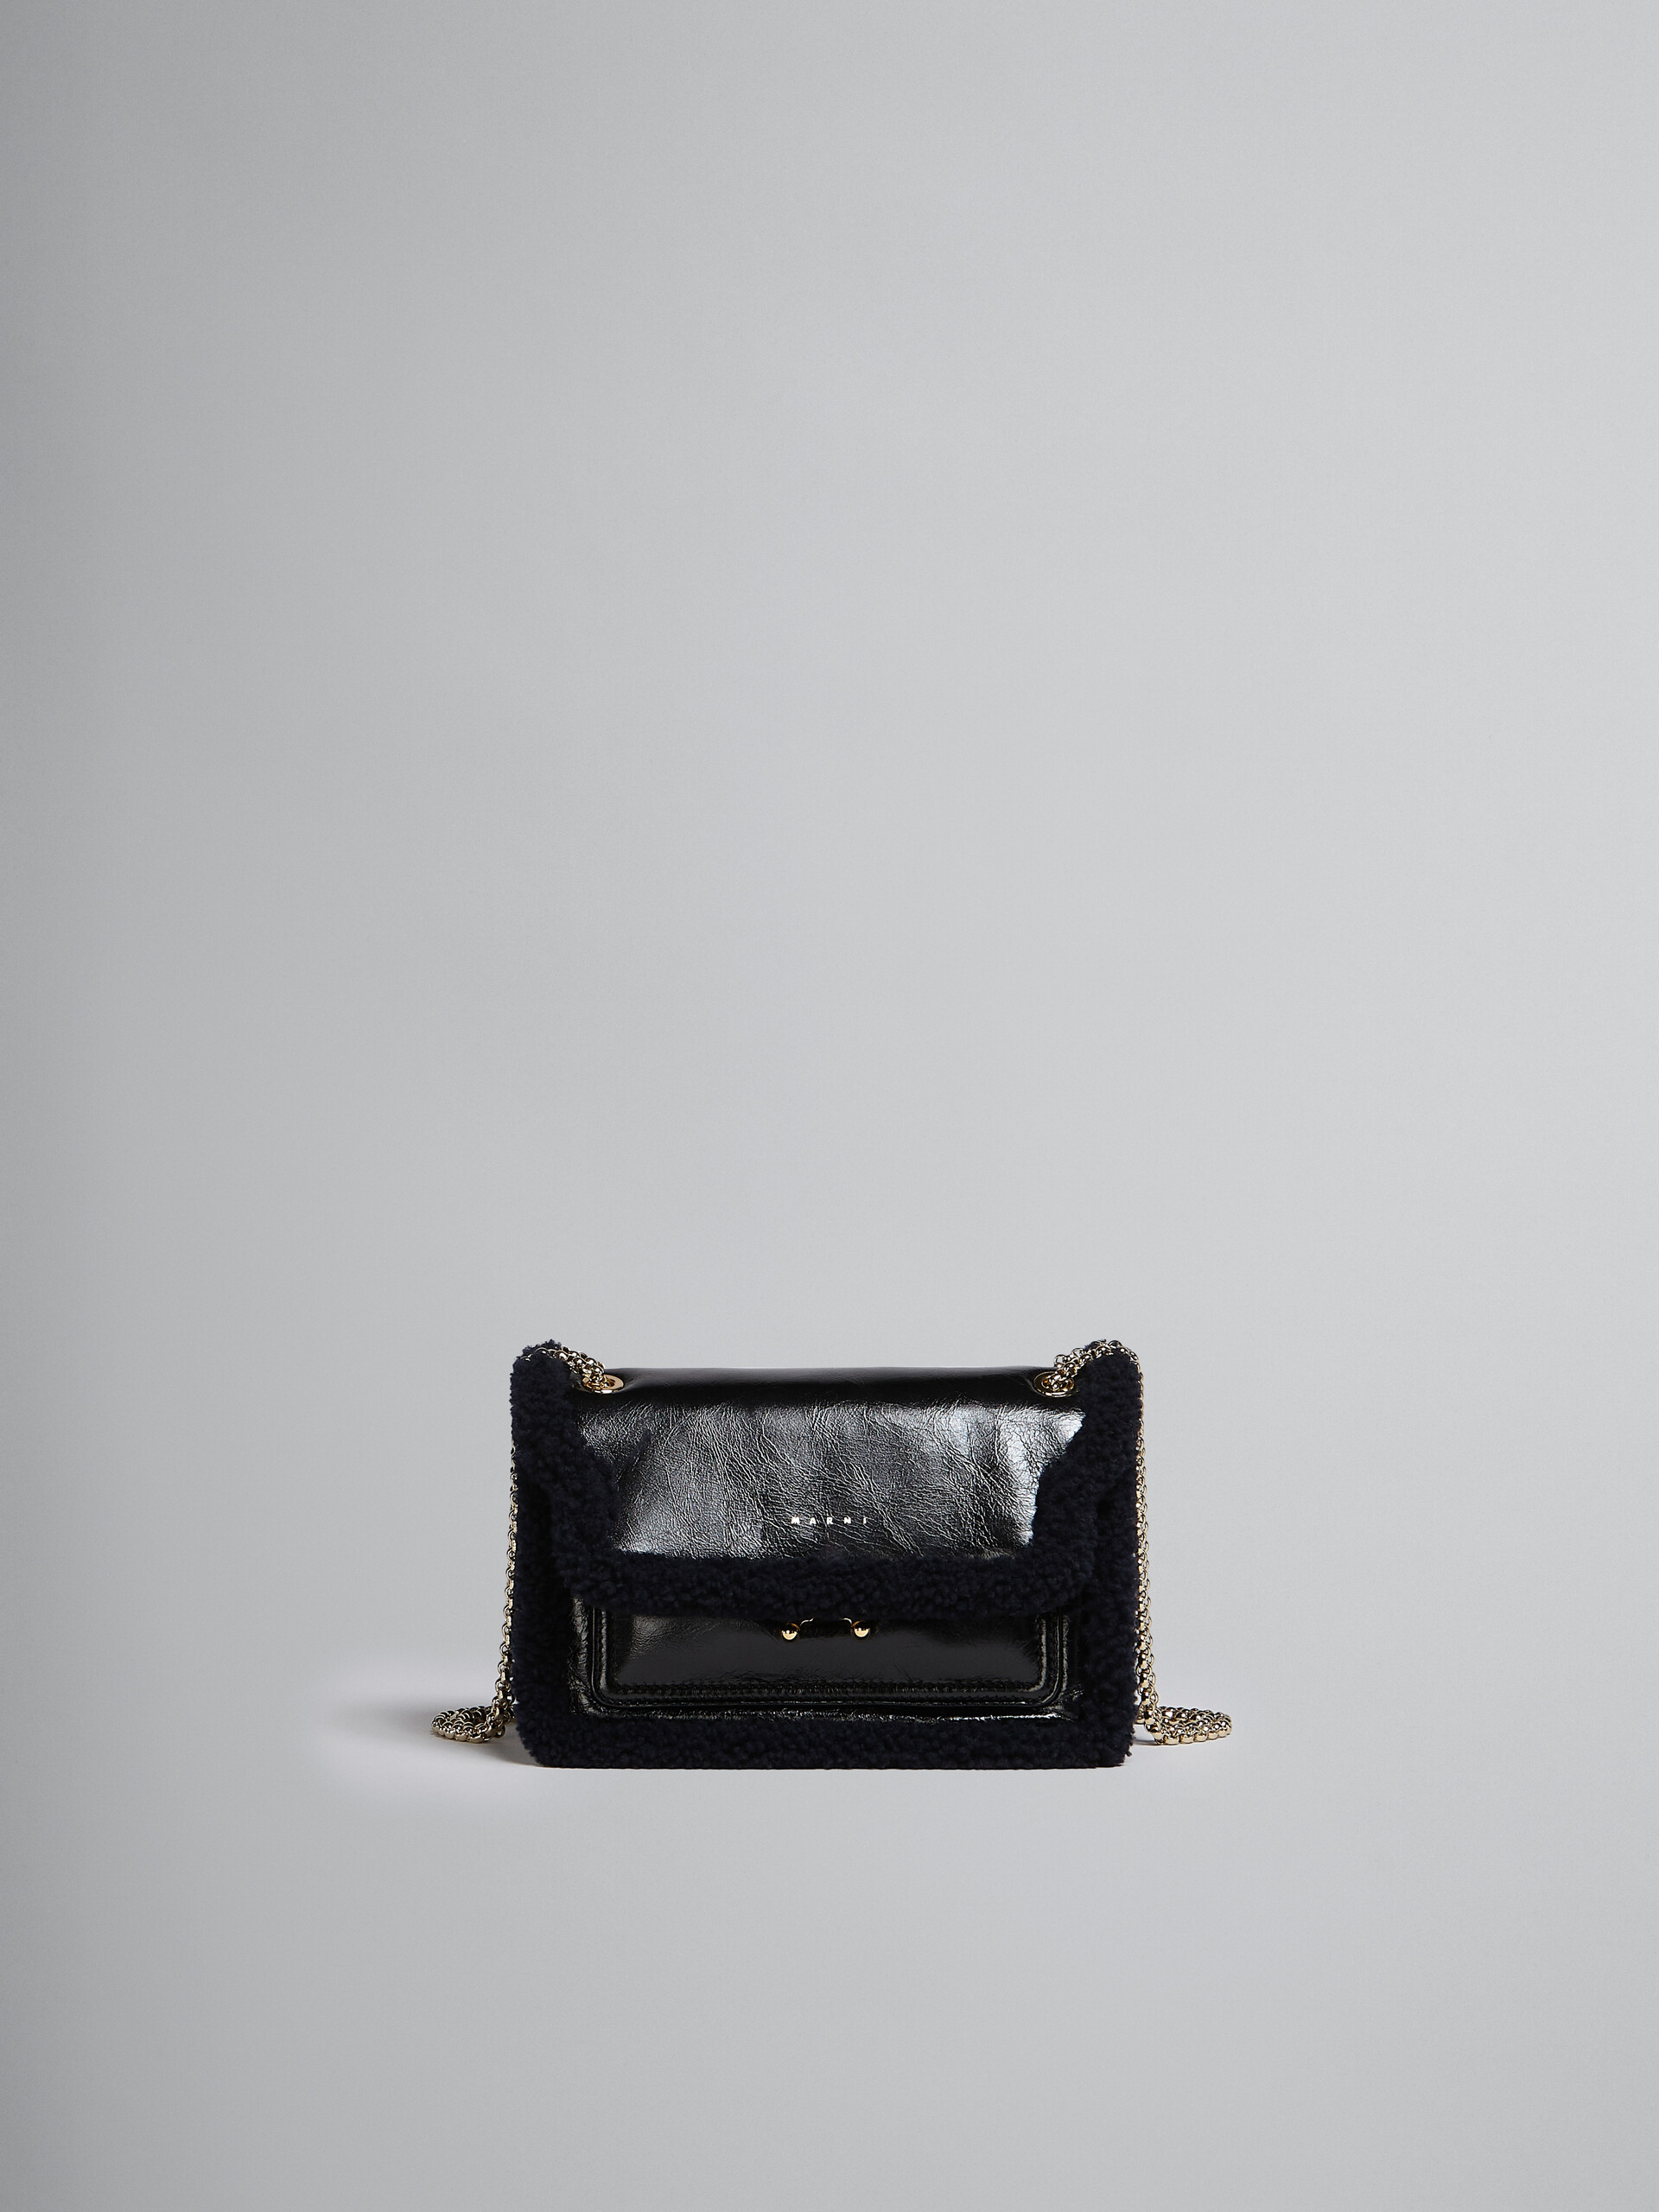 Trunk Envelope Chain in black leather and merinos - Shoulder Bags - Image 1